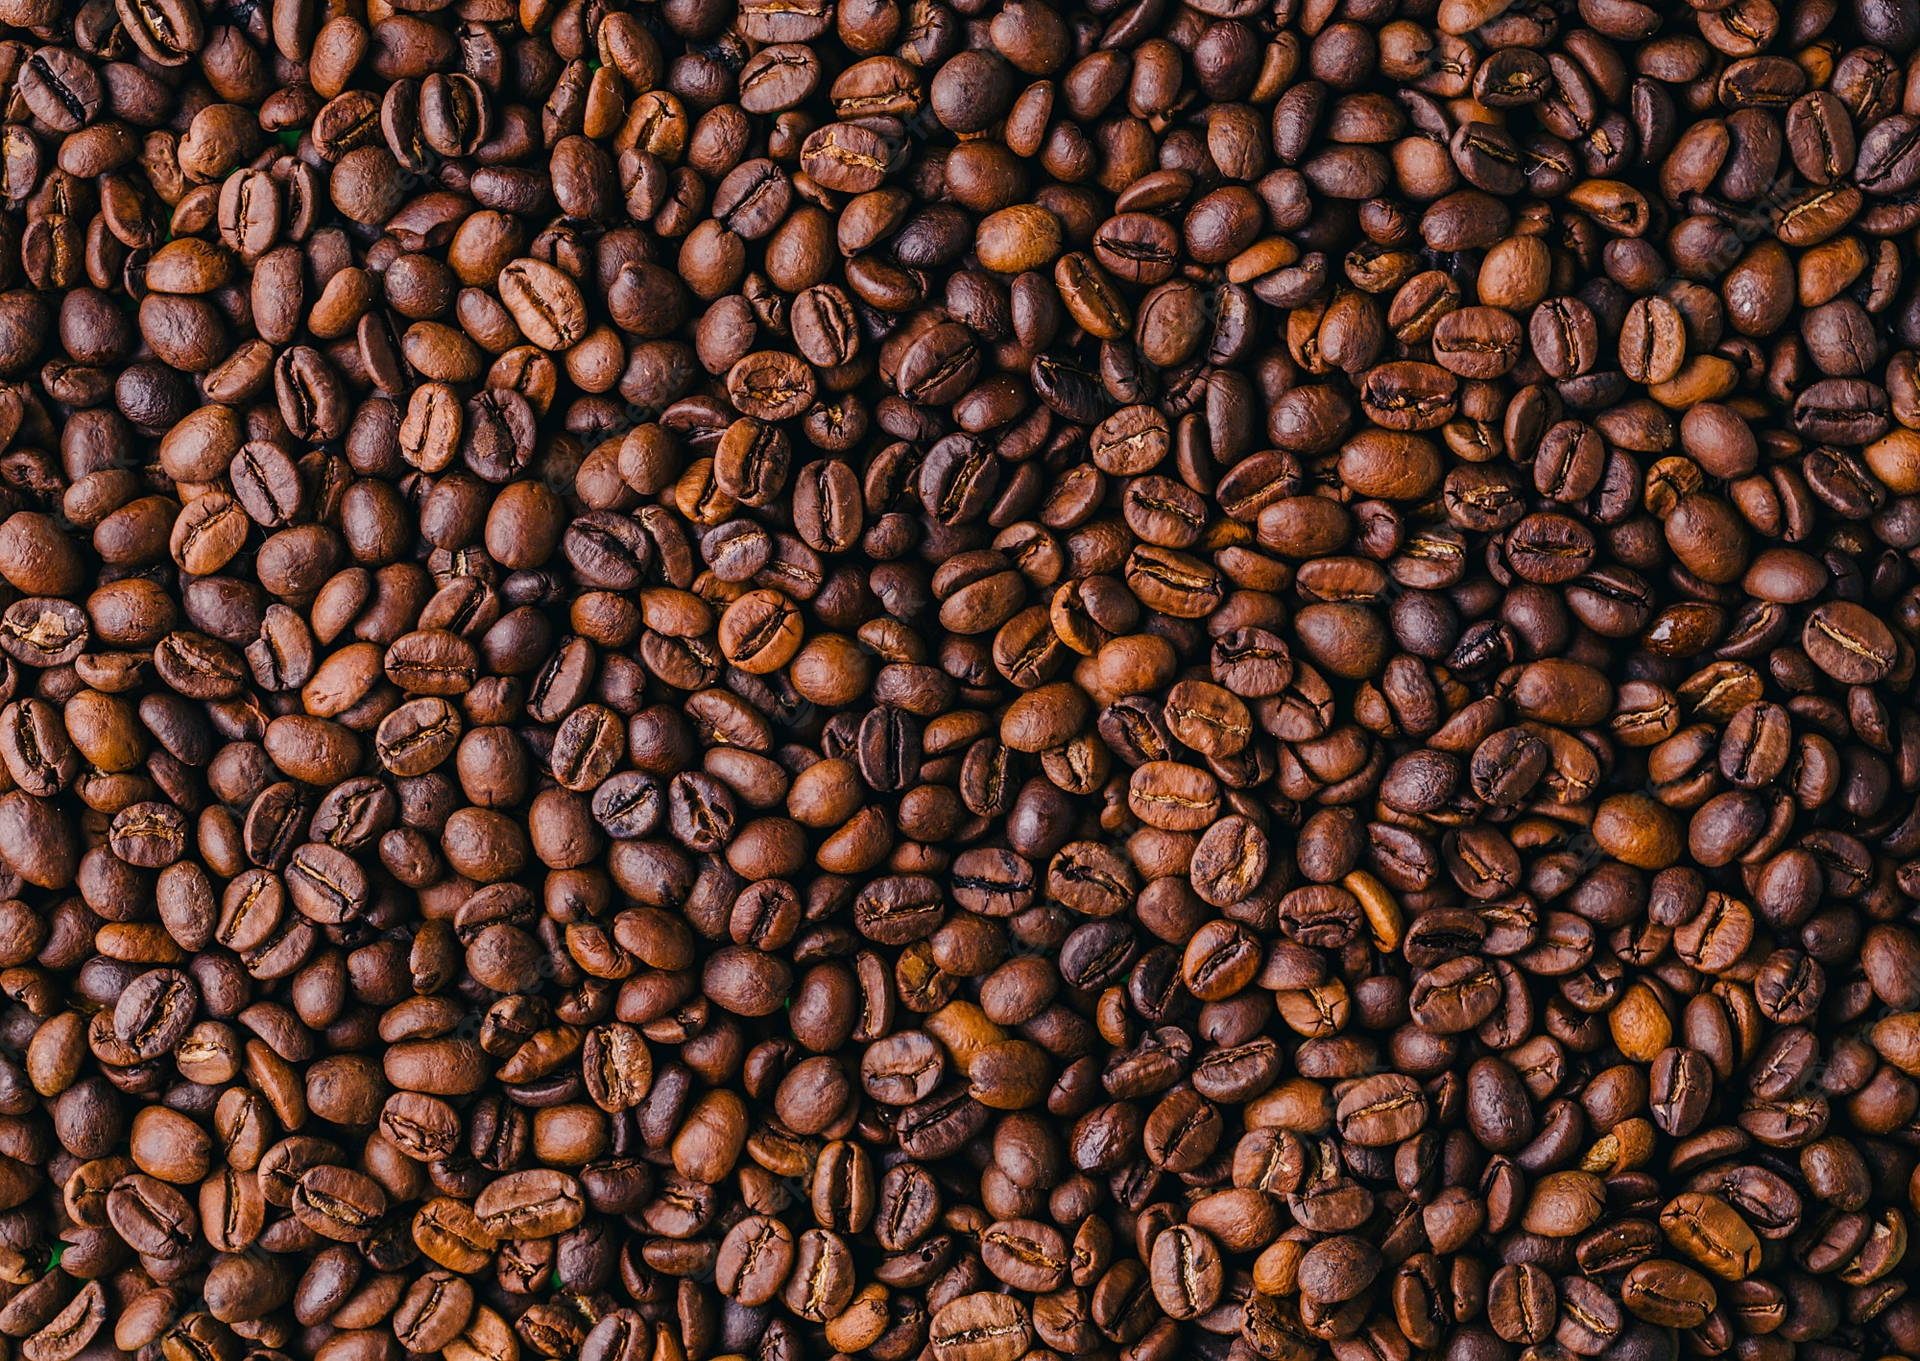 Large Area Of Coffee Beans Picture